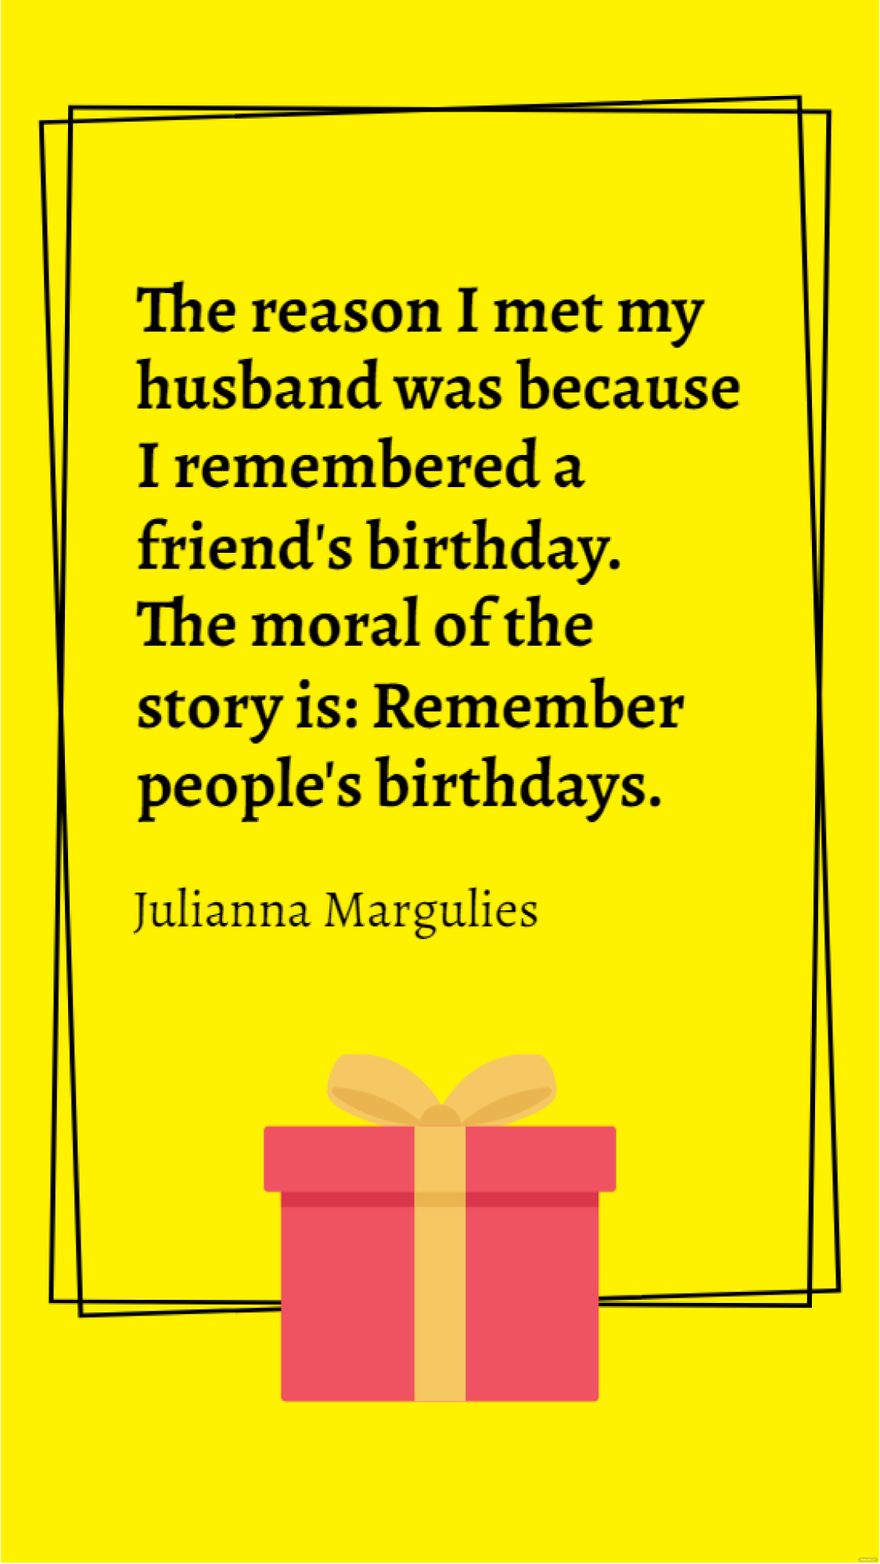 Free Julianna Margulies - The reason I met my husband was because I remembered a friend's birthday. The moral of the story is: Remember people's birthdays.